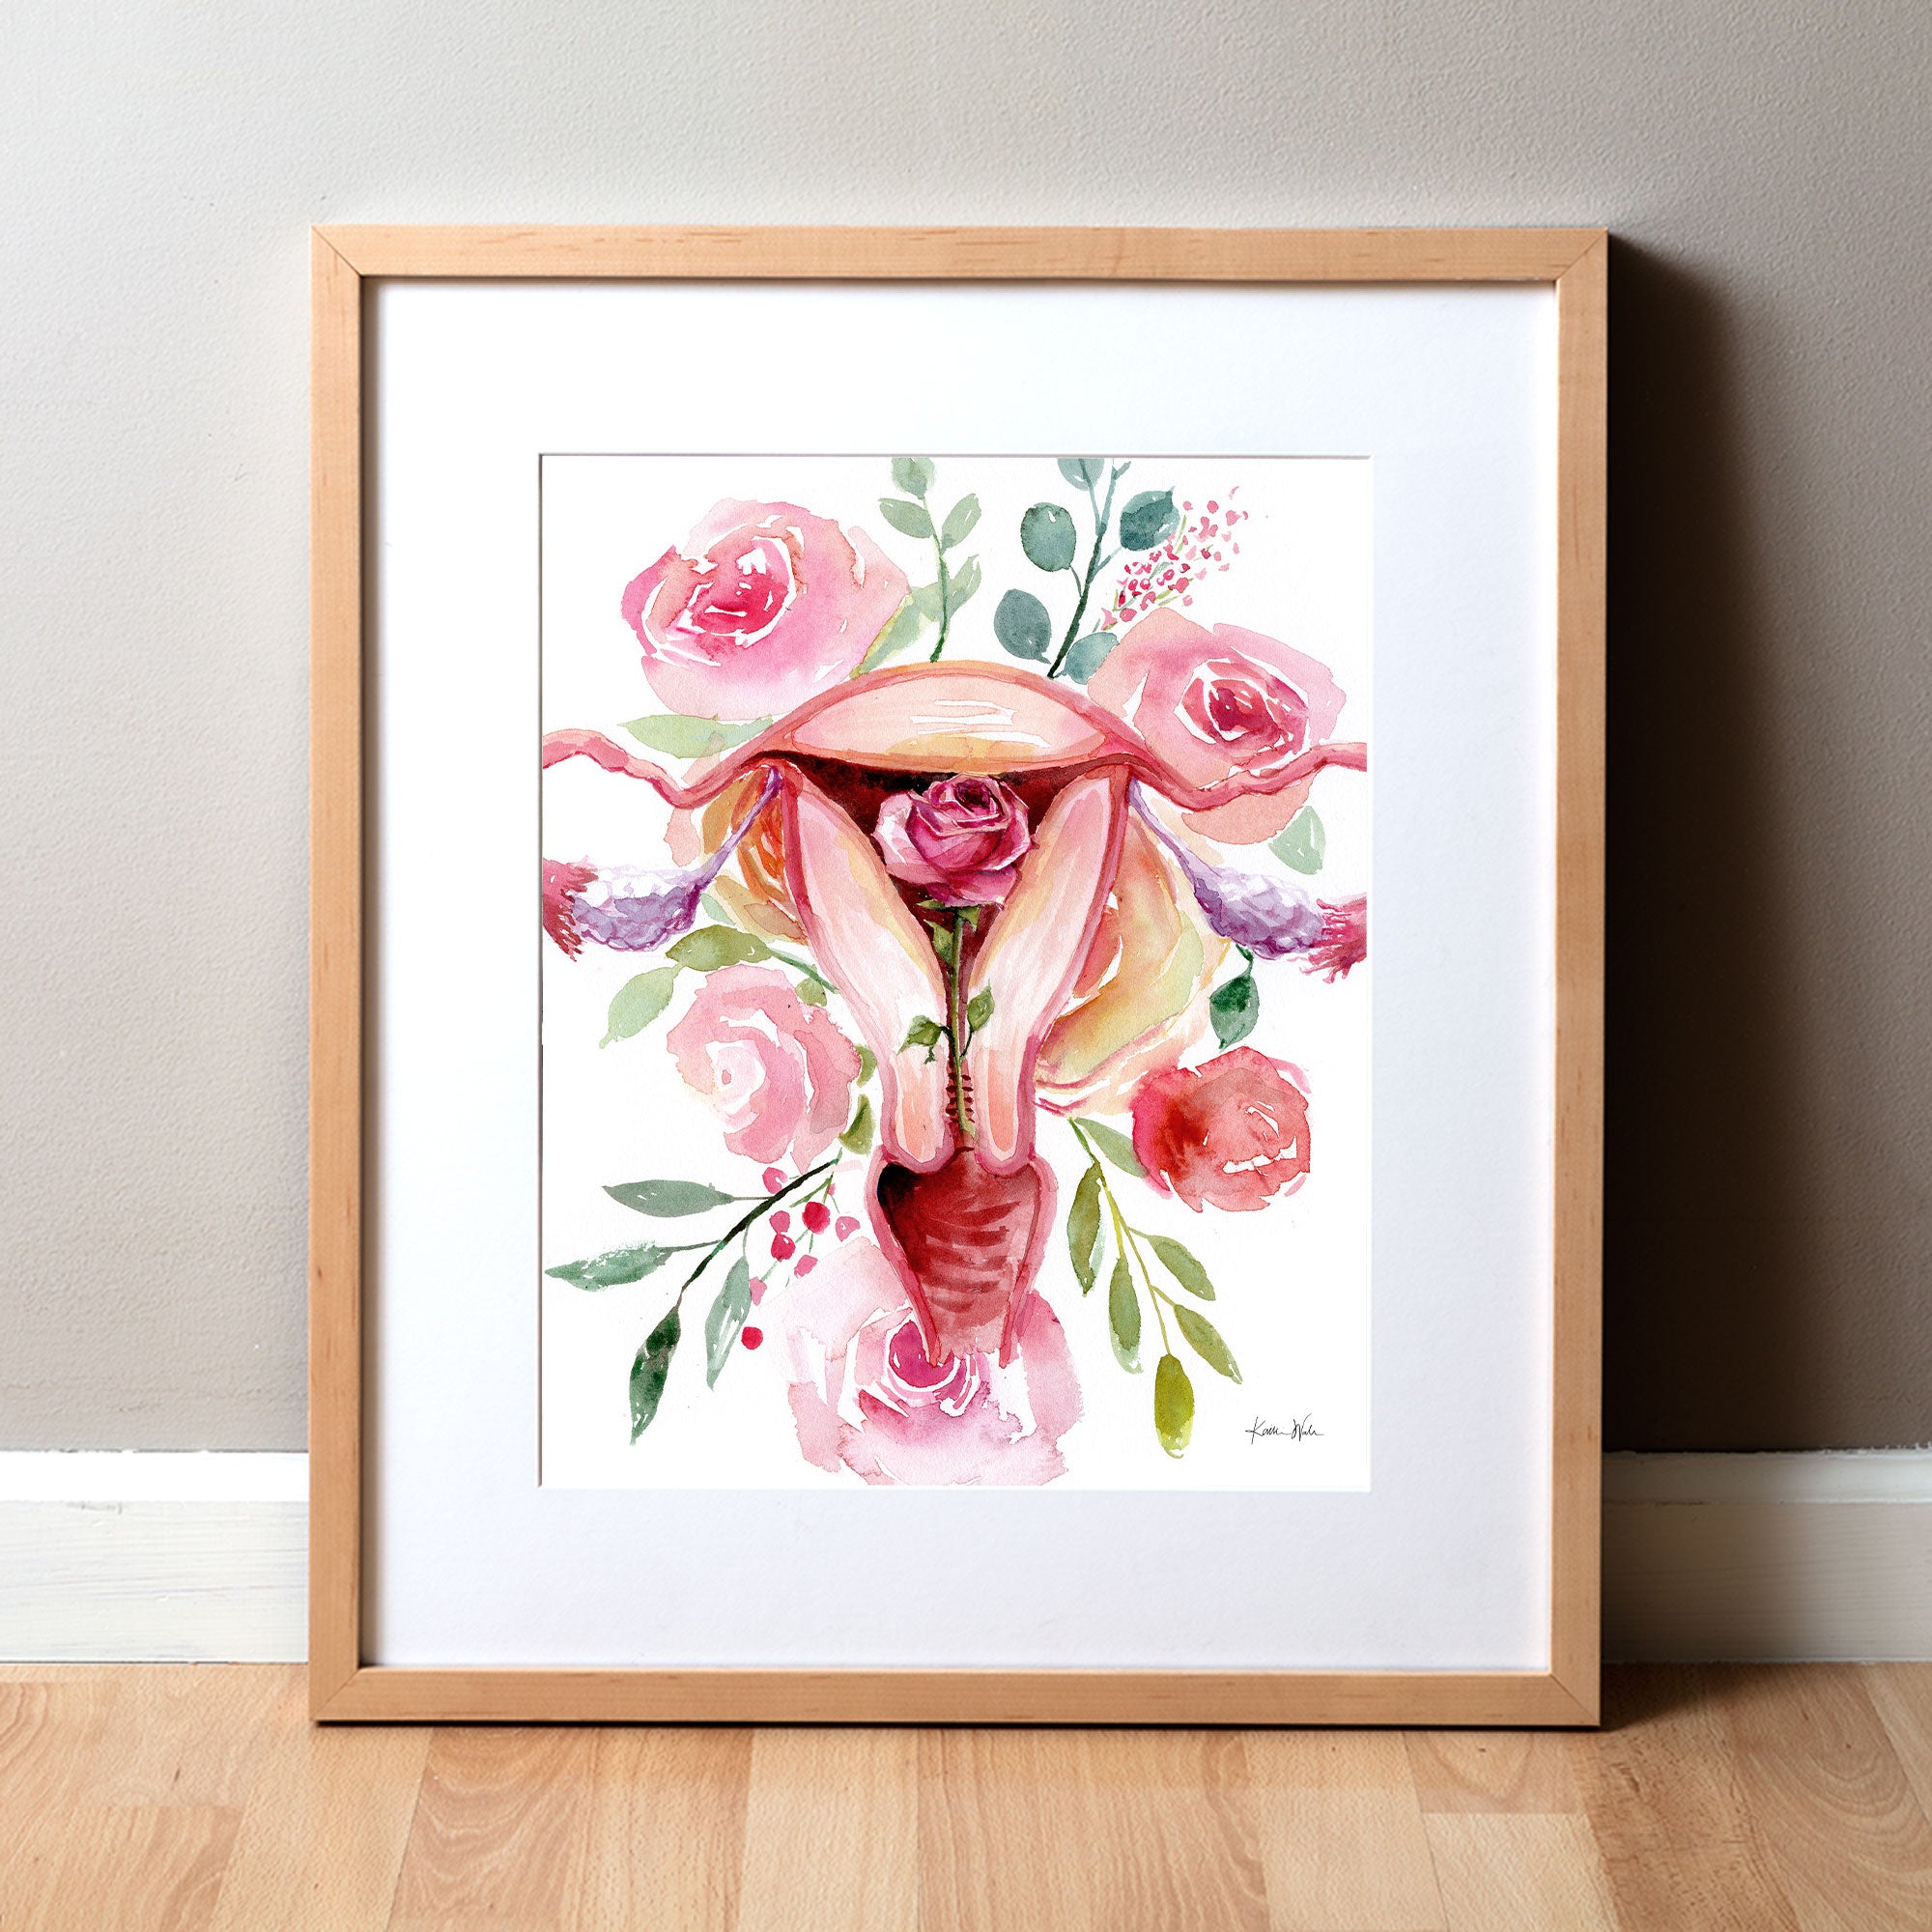 Framed watercolor painting of a uterus with flowers around.